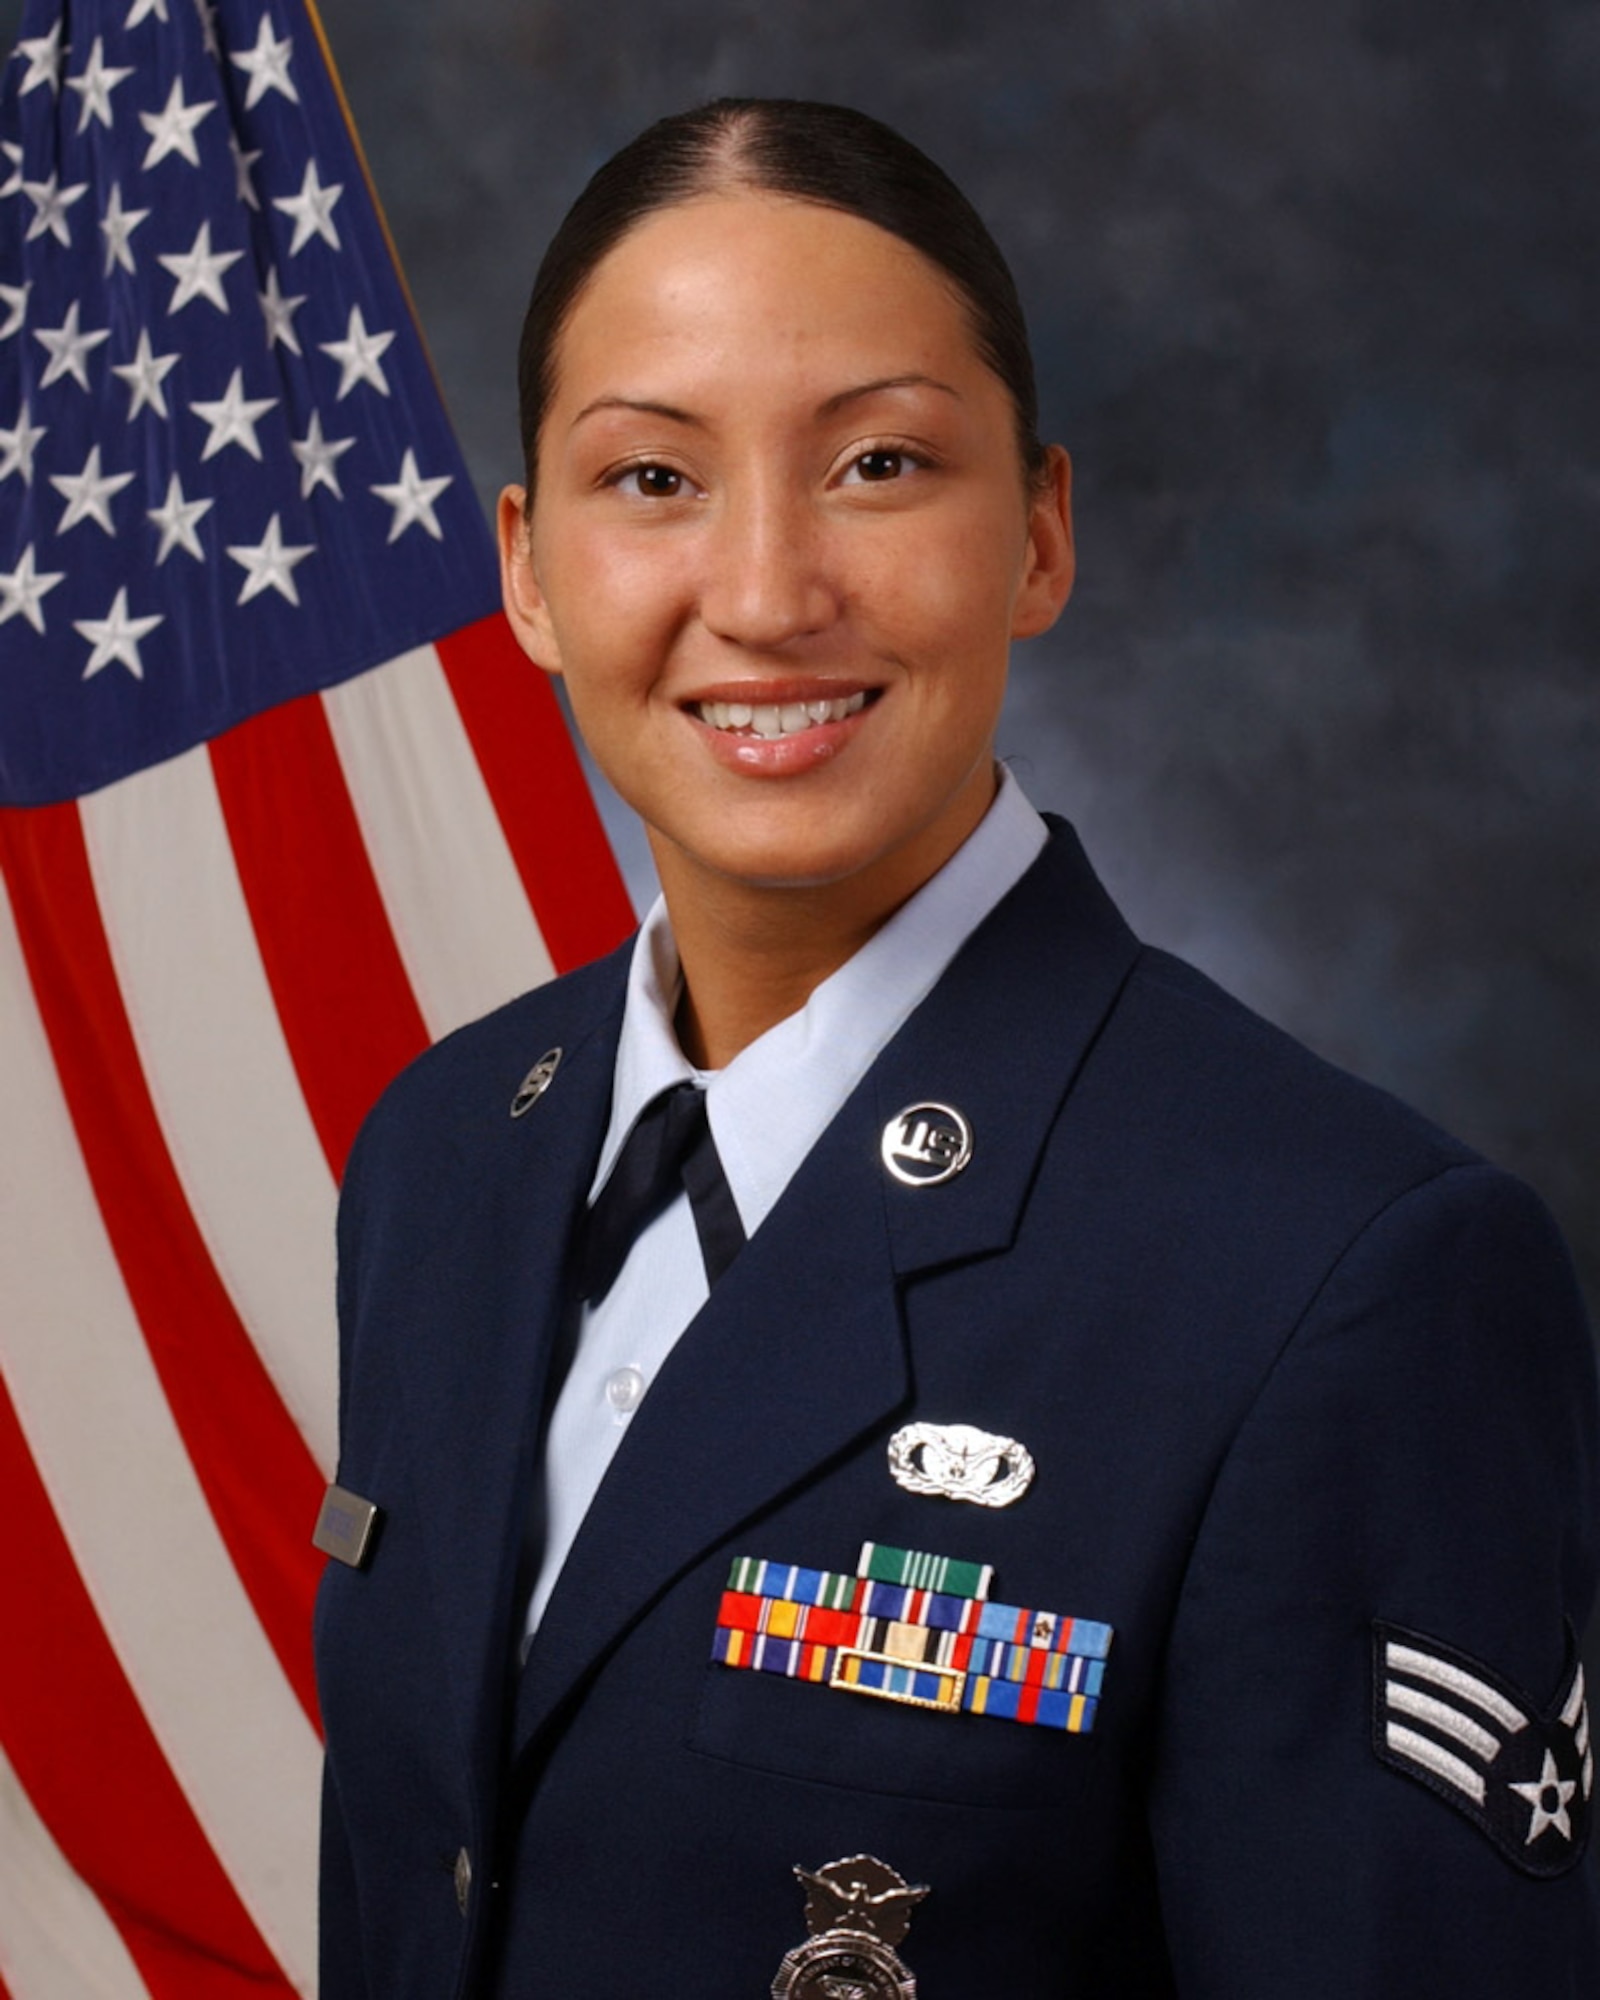 Senior Airman Alicia Goestschel of Royal Air Force Mildenhall, England, is one of the 12 Outstanding Airmen for 2008. (U.S. Air Force photo)